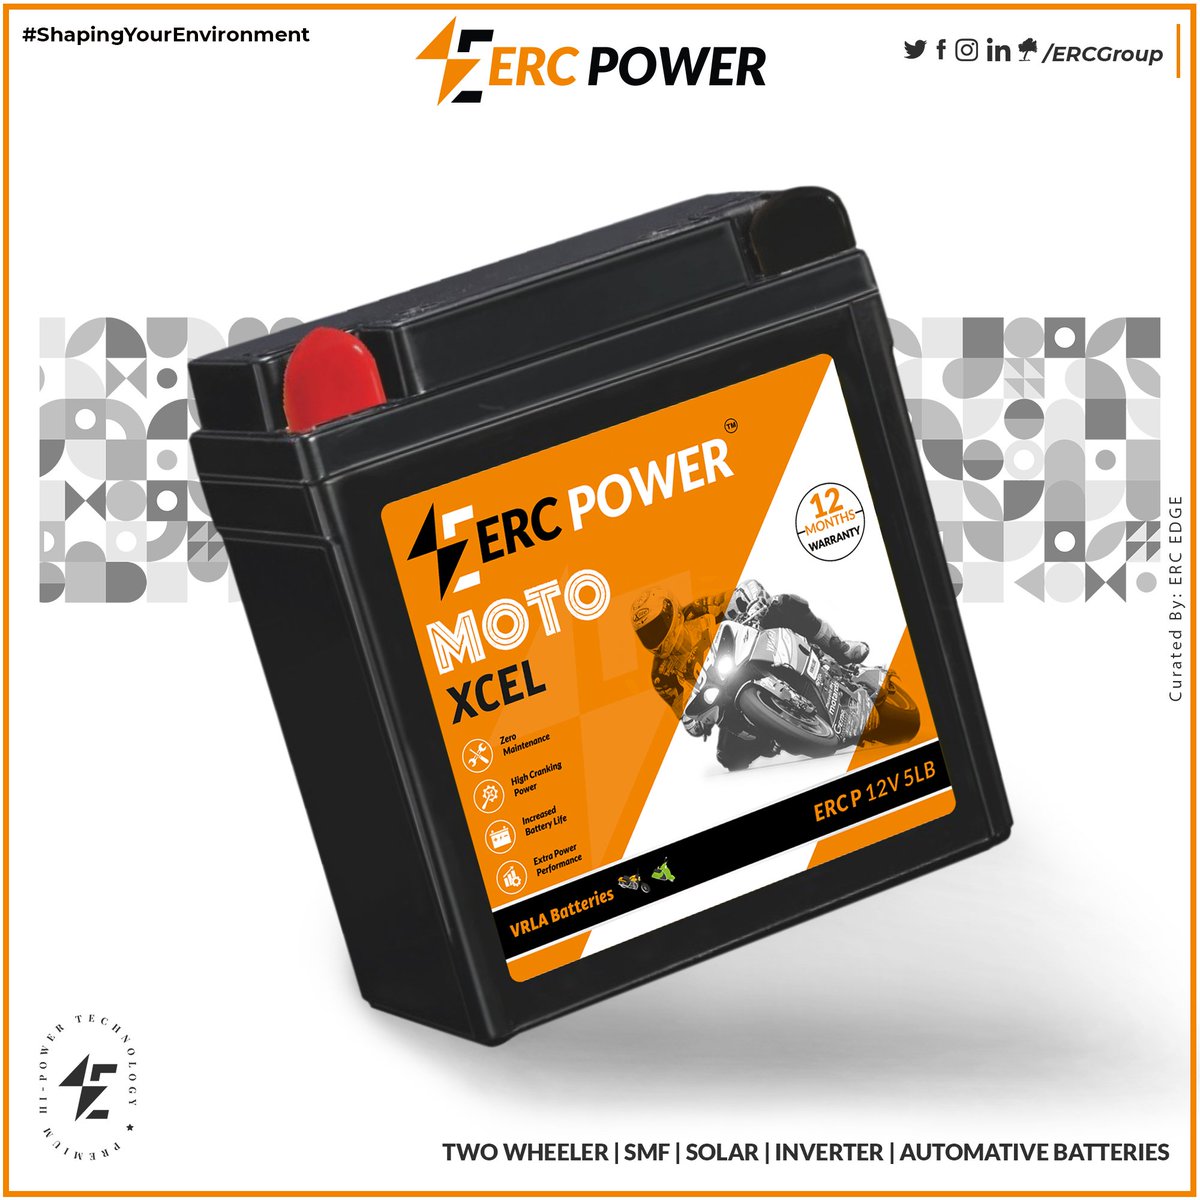 ERC POWER
TWO WHEELER BATTERY
MOTO XCEL
#12monthswarranty
#ercpower
#shapingyourenvironment

Visit at ercpower.com
Contact: 9905937281

#ercpowersmfbattery #getitnow #ERCBatteries #motoxcel #twowheelerbattery #battery #motorcycle #motorbike #scooter #electricscooter